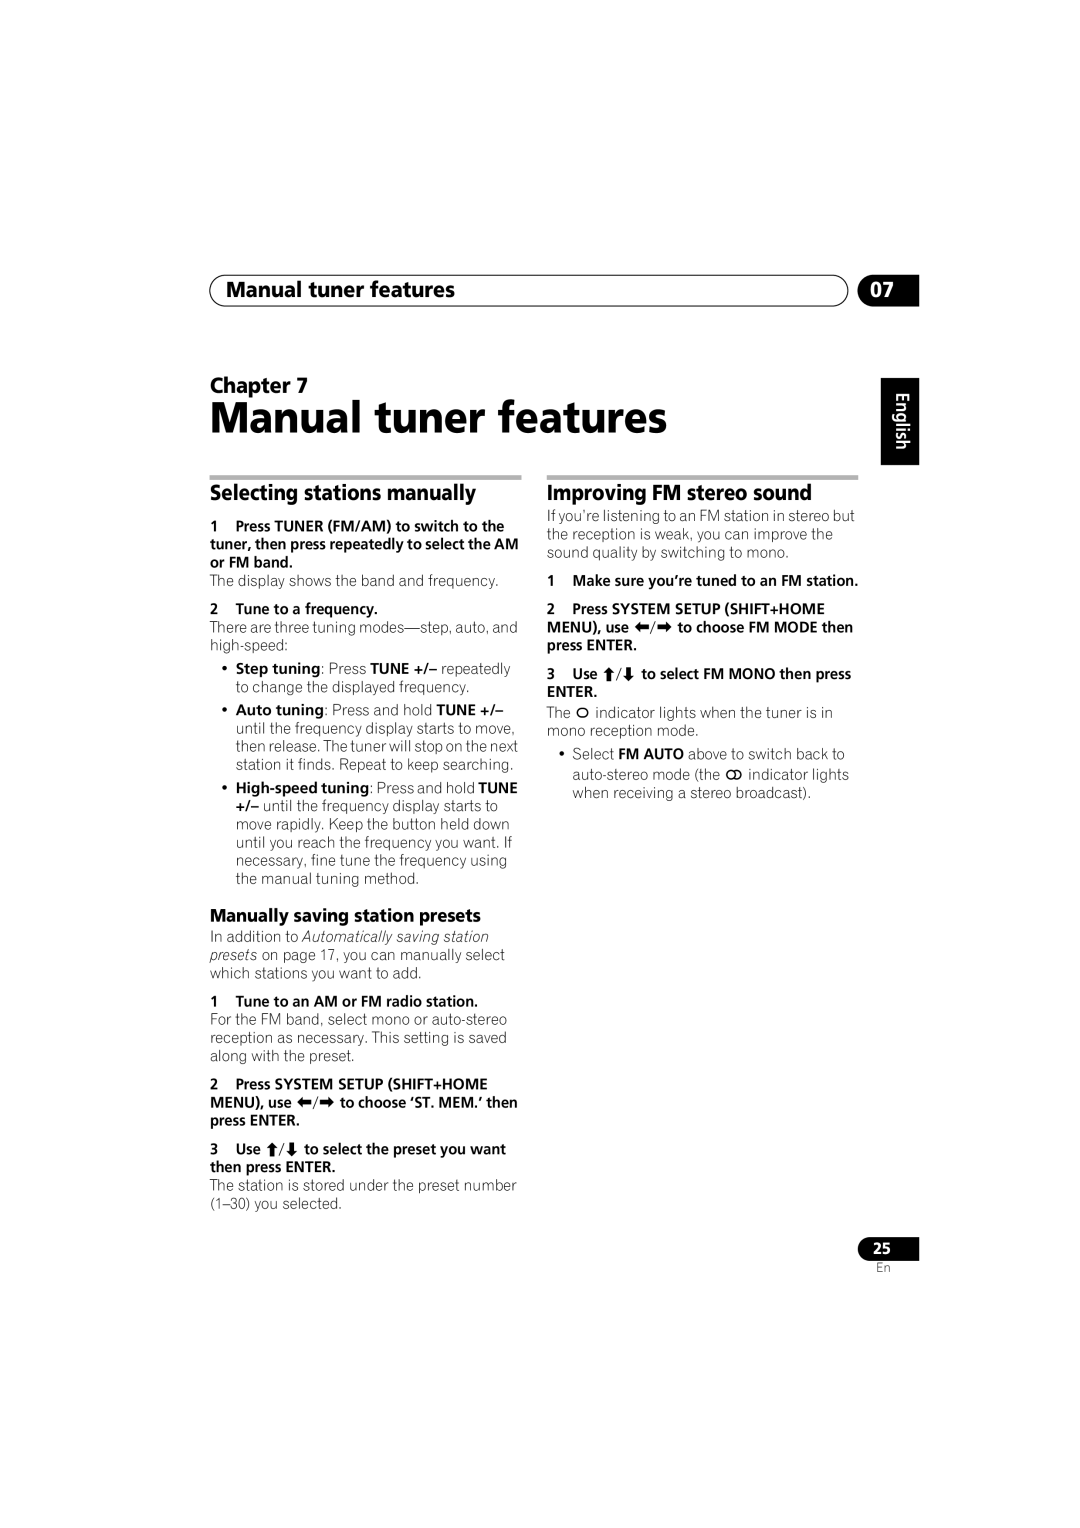 Pioneer S-GX3V, XV-GX3 Manual tuner features Chapter, Selecting stations manually, Improving FM stereo sound 